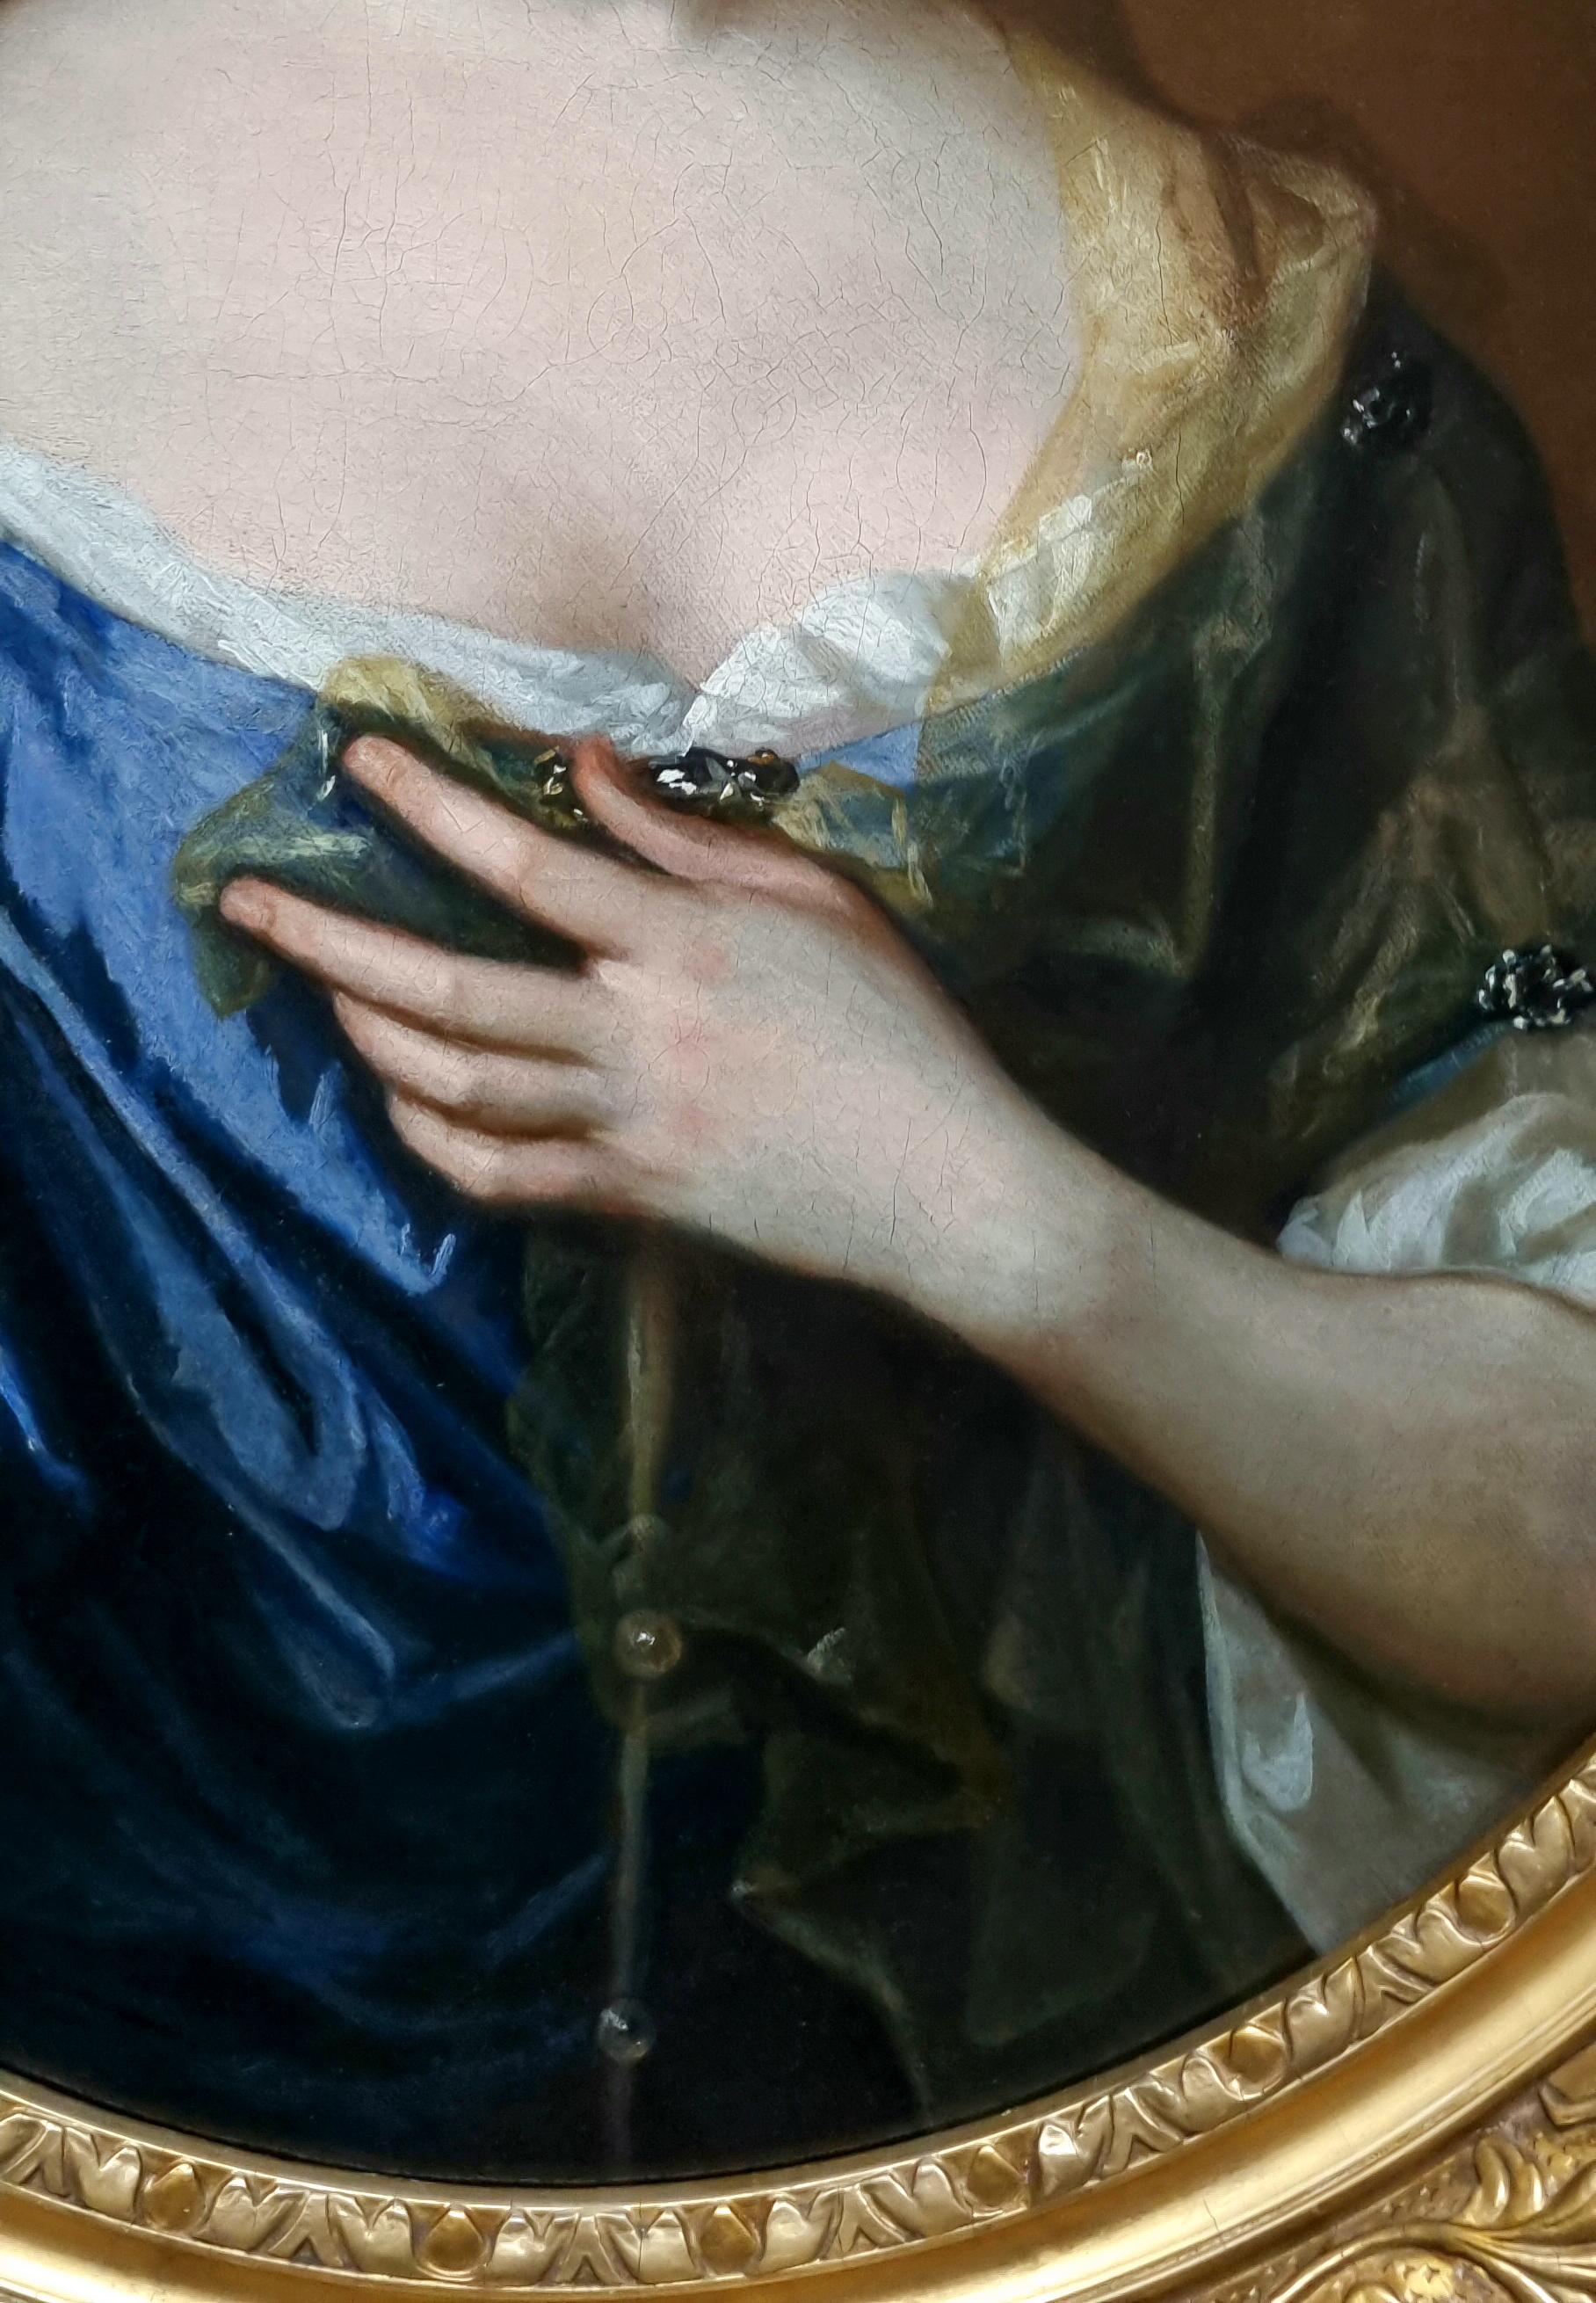 Portrait of a Lady in a Blue Gown Holding a Sheer Scarf c.1675-85, Oil on canvas For Sale 3